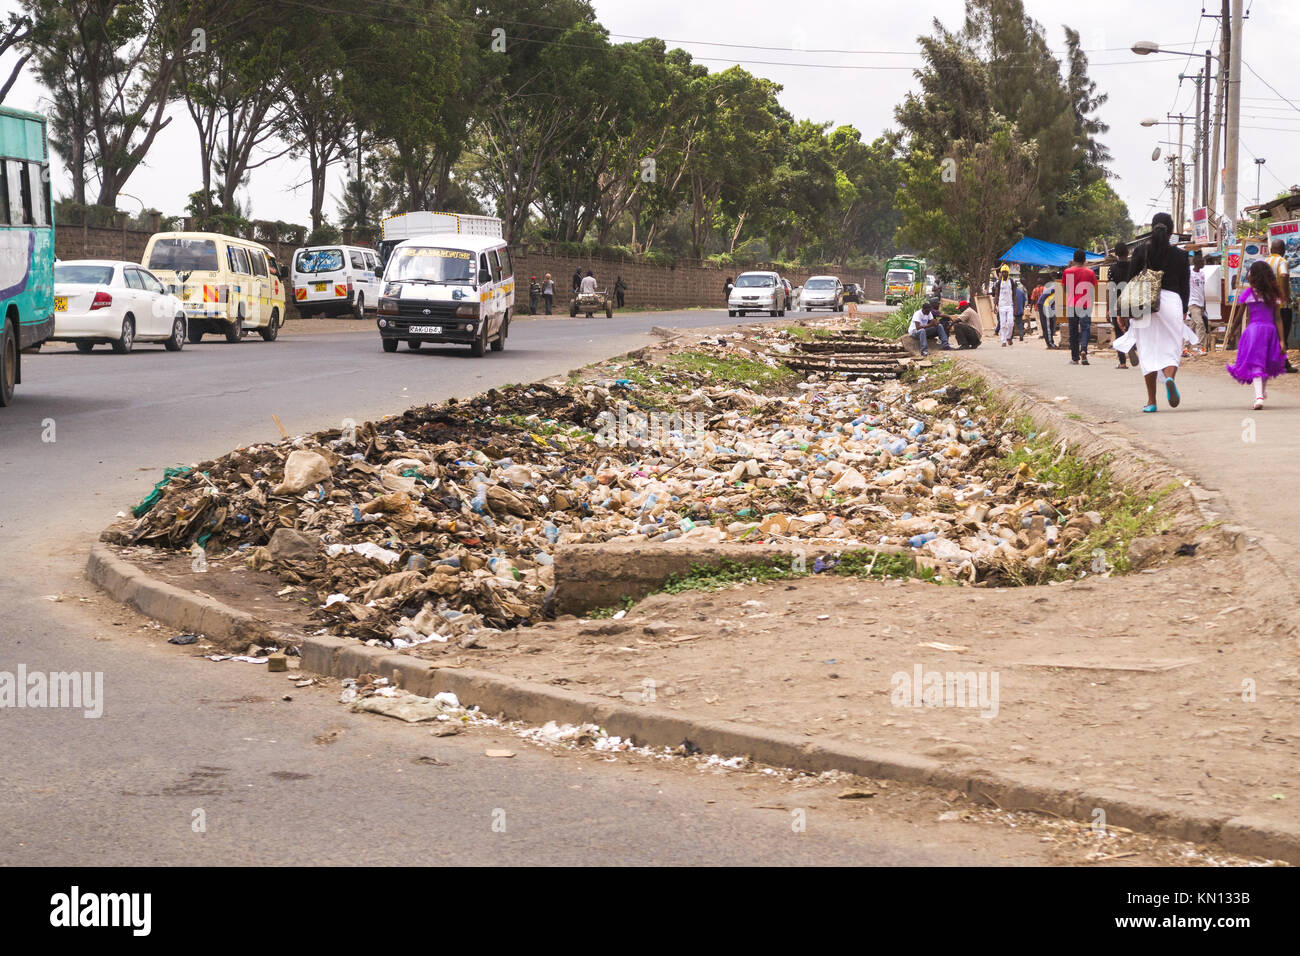 A large pile of plastic and general waste rubbish lies by the side of a busy road as vehicles drive past and pedestrians walk by, Nairobi, Kenya, East Stock Photo